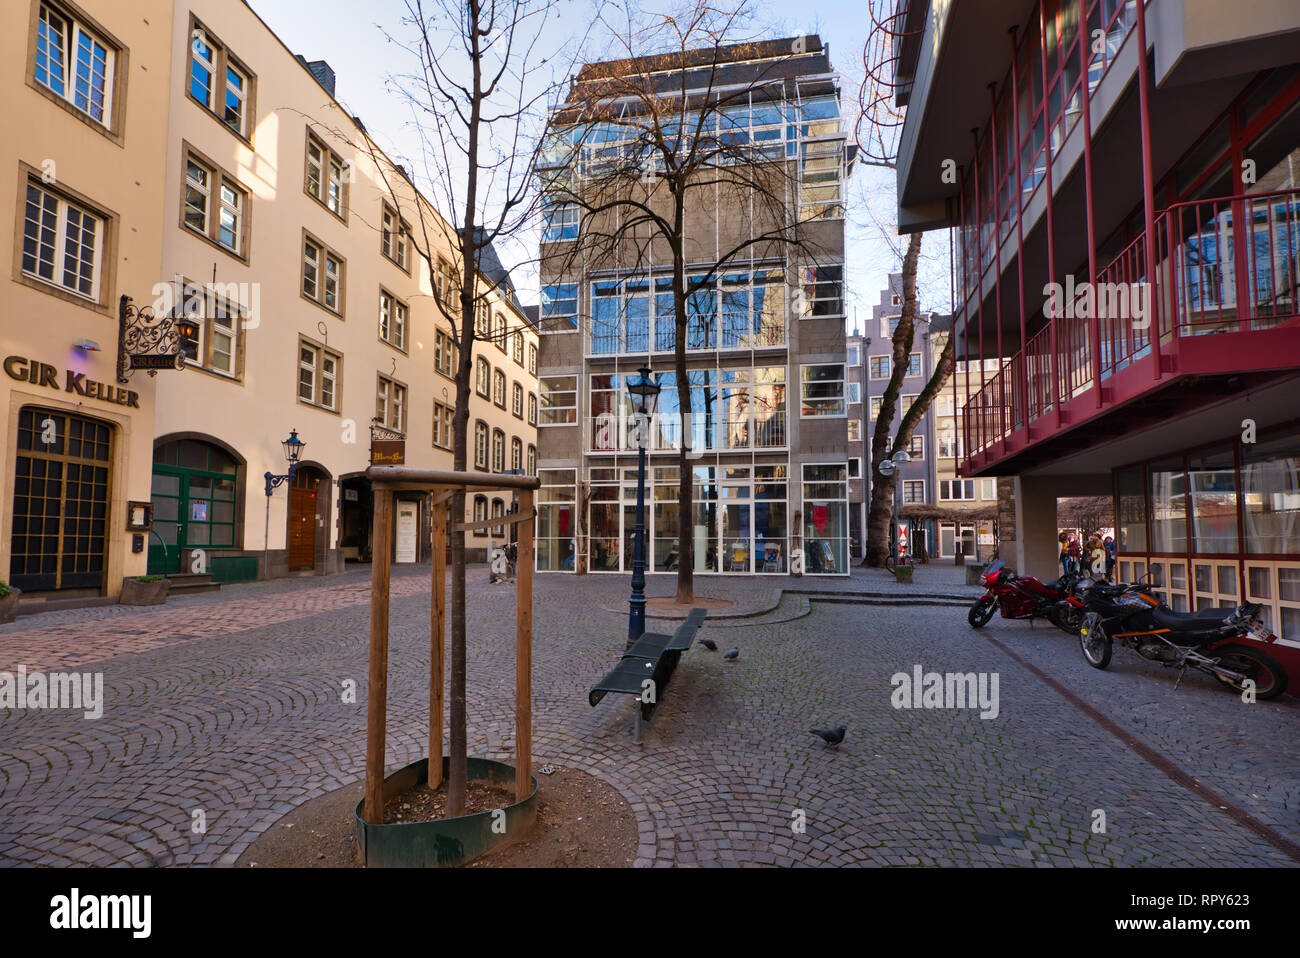 Cologne, GERMANY - February 15, 2019: Many unidentified individuals enjoy the warm sundown in the historic old town. Stock Photo